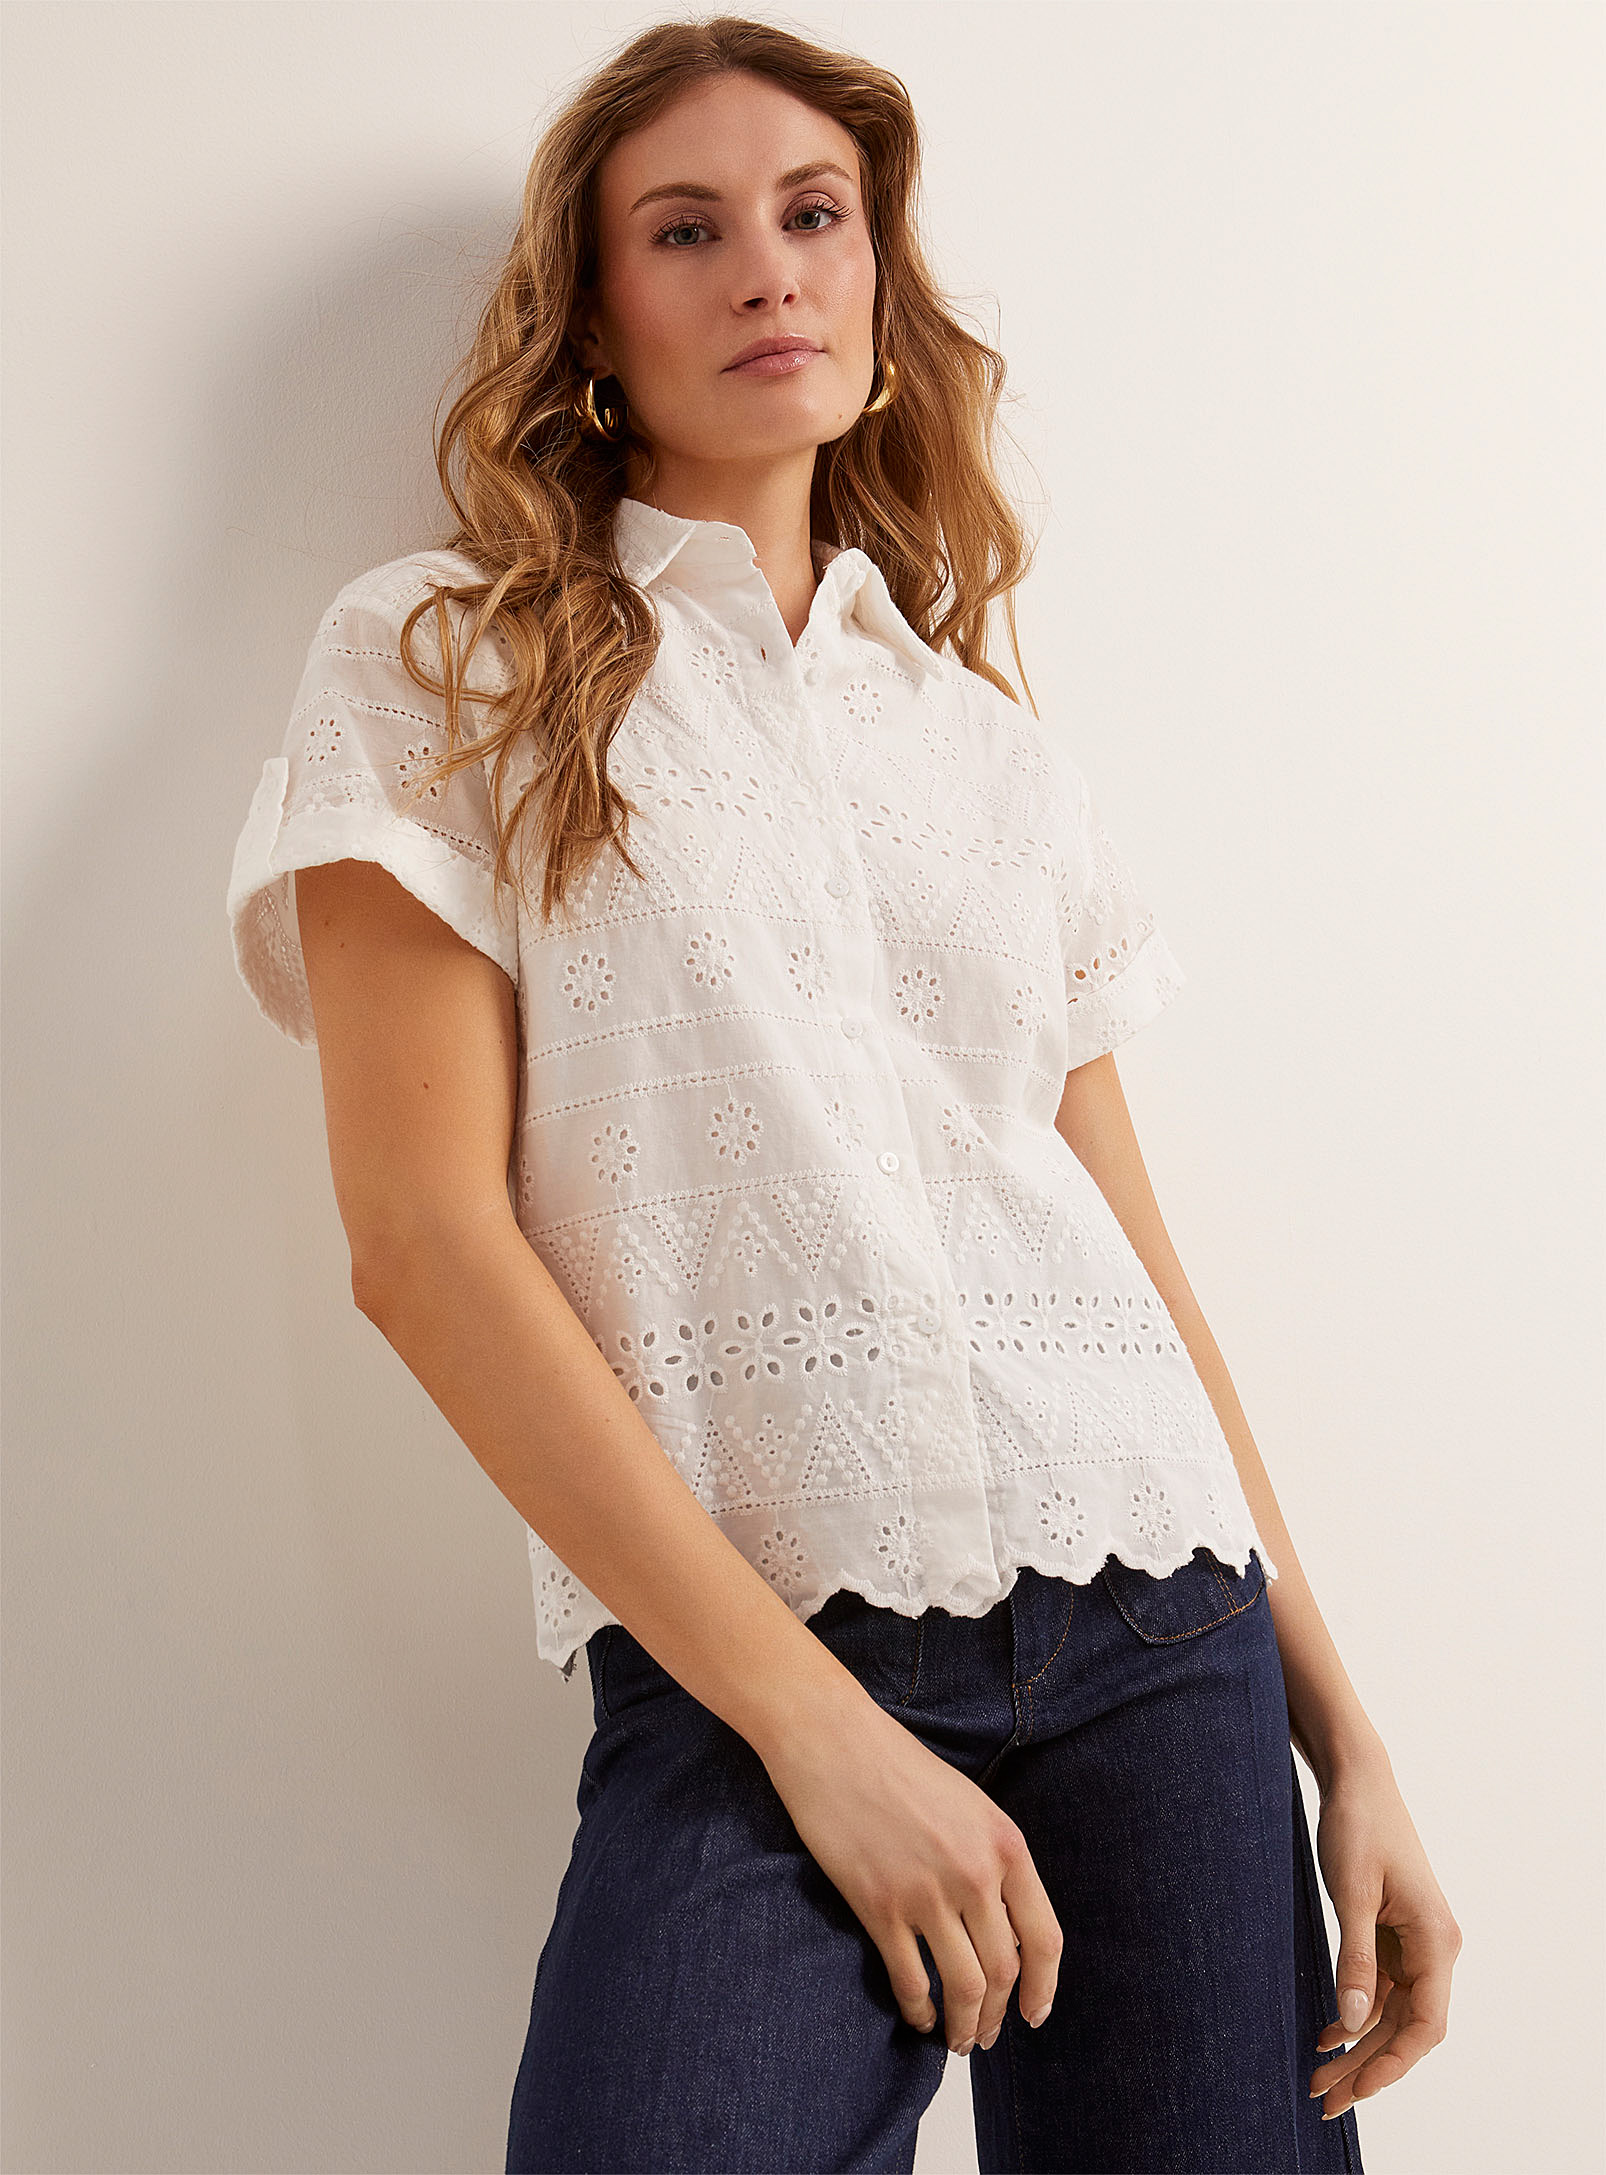 Contemporaine - Women's Scalloped edging broderie anglaise shirt